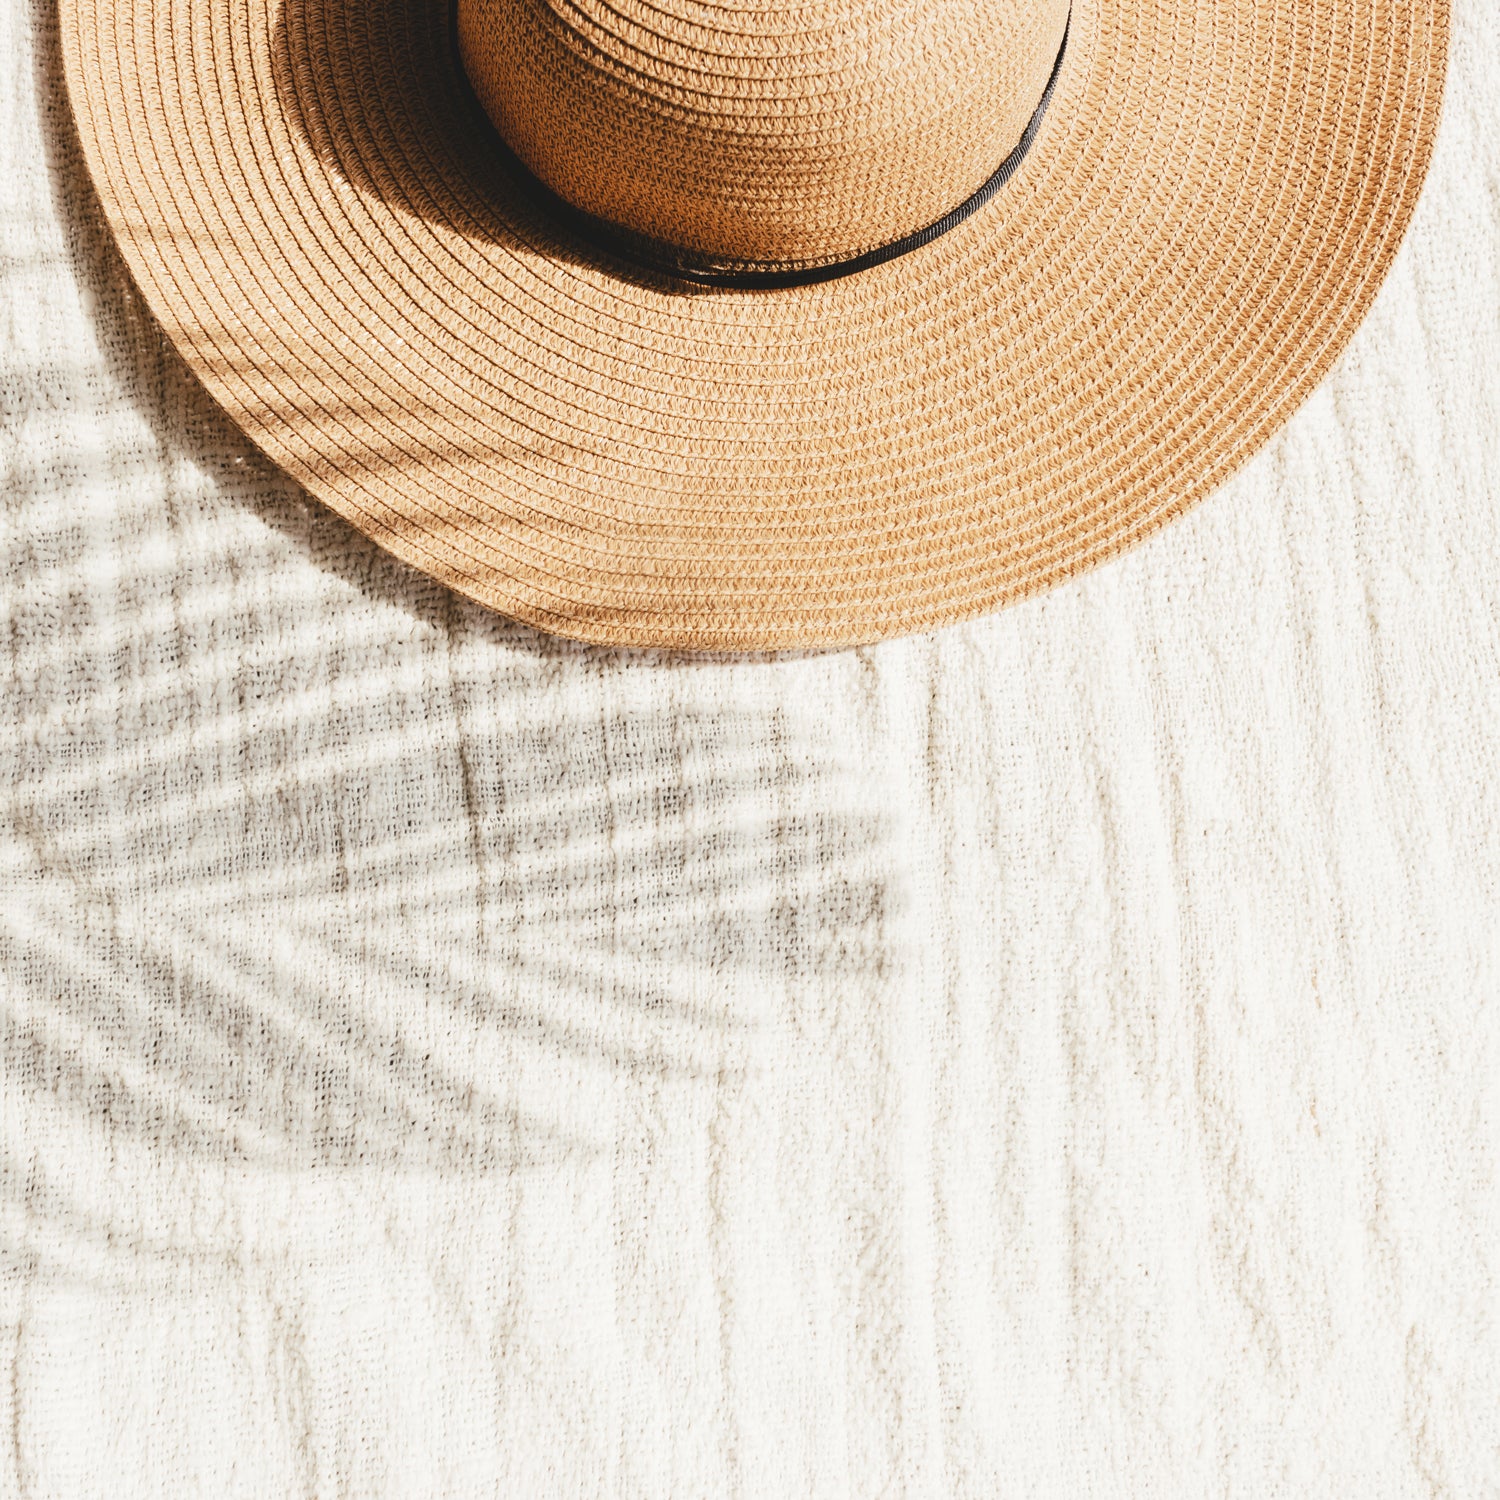 A straw hat resting on a beach - inspiration for our "Sea & Sand" fragrance